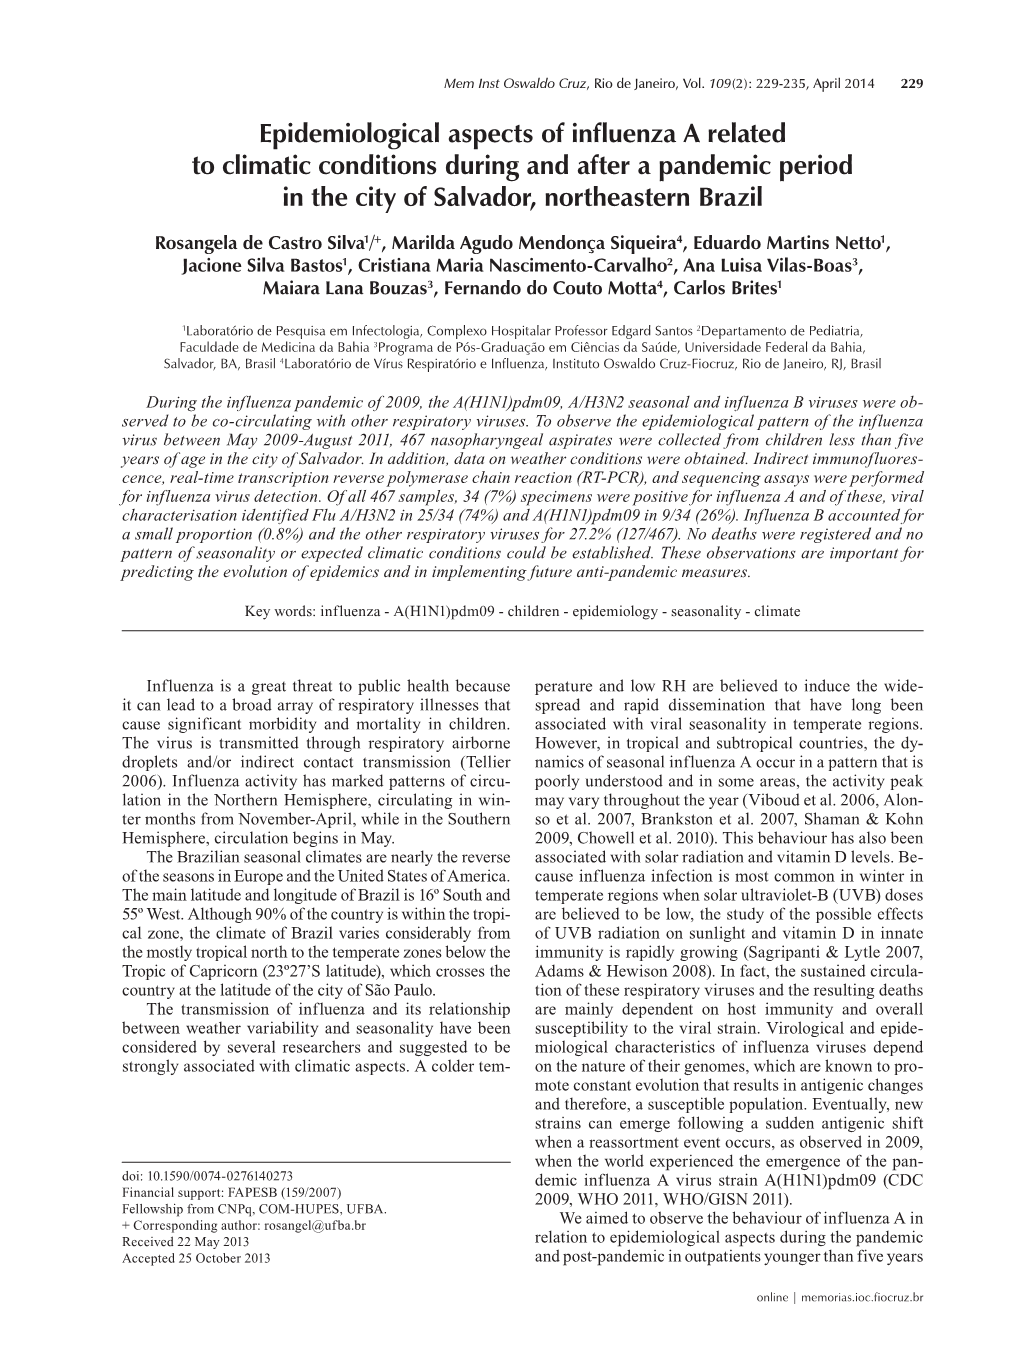 Epidemiological Aspects of Influenza a Related to Climatic Conditions During and After a Pandemic Period in the City of Salvador, Northeastern Brazil